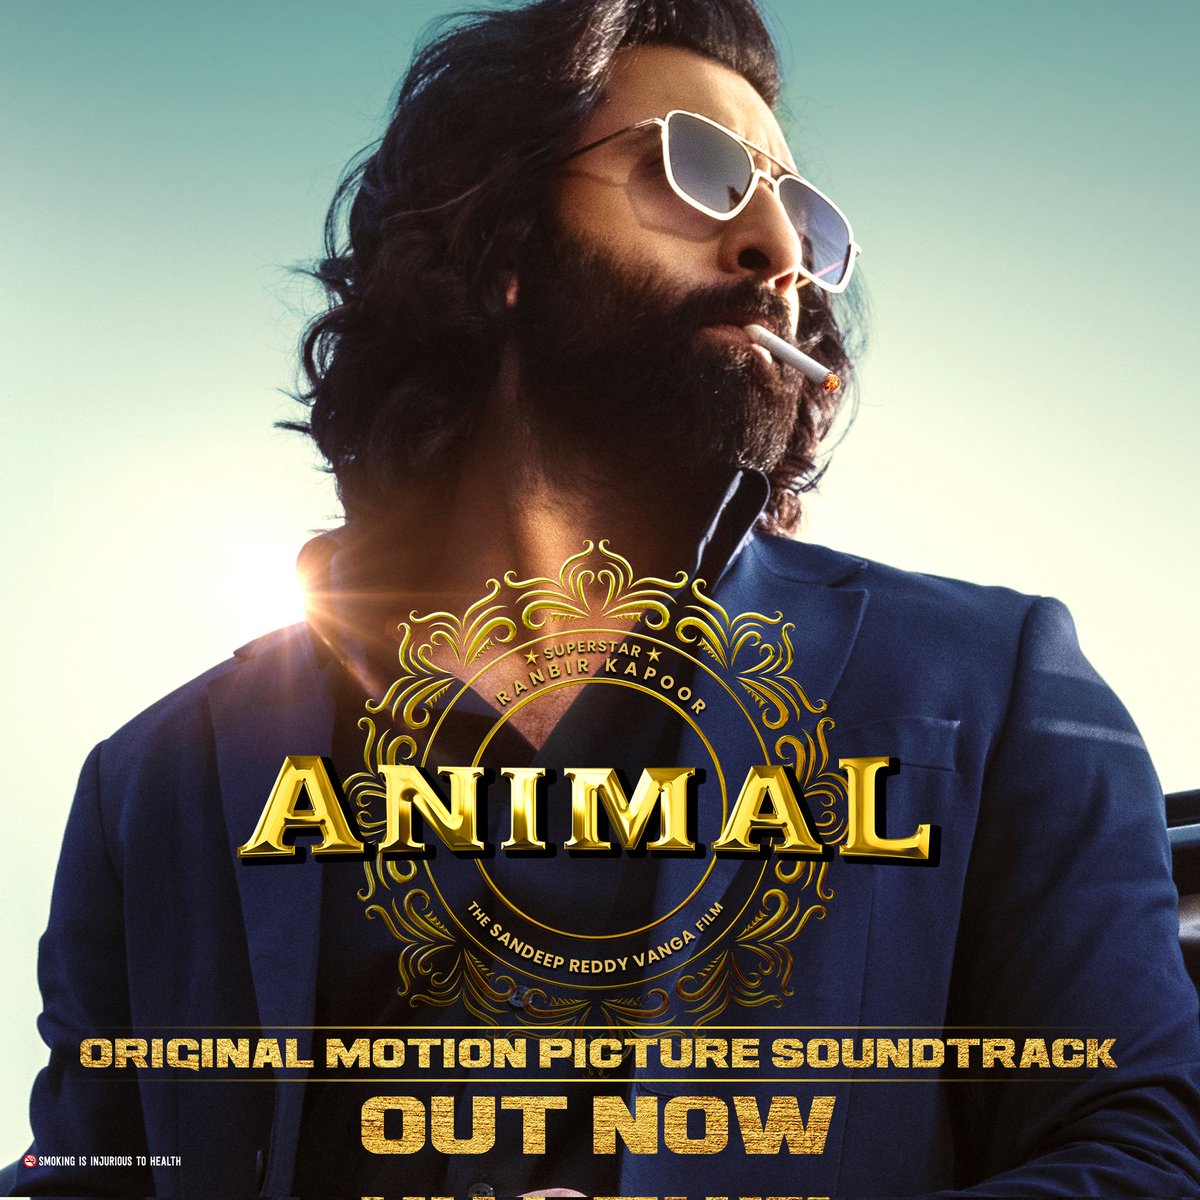 The Most Awaited Original Motion Picture Soundtrack of #Animal is yours now 🔥
Grab your headphones and dive into the musical extravaganza with your favorite themes and background scores 🎶

bit.ly/ANIMALOriginal…

#AnimalOST #AnimalInCinemasNow 
#AnimalHuntBegins